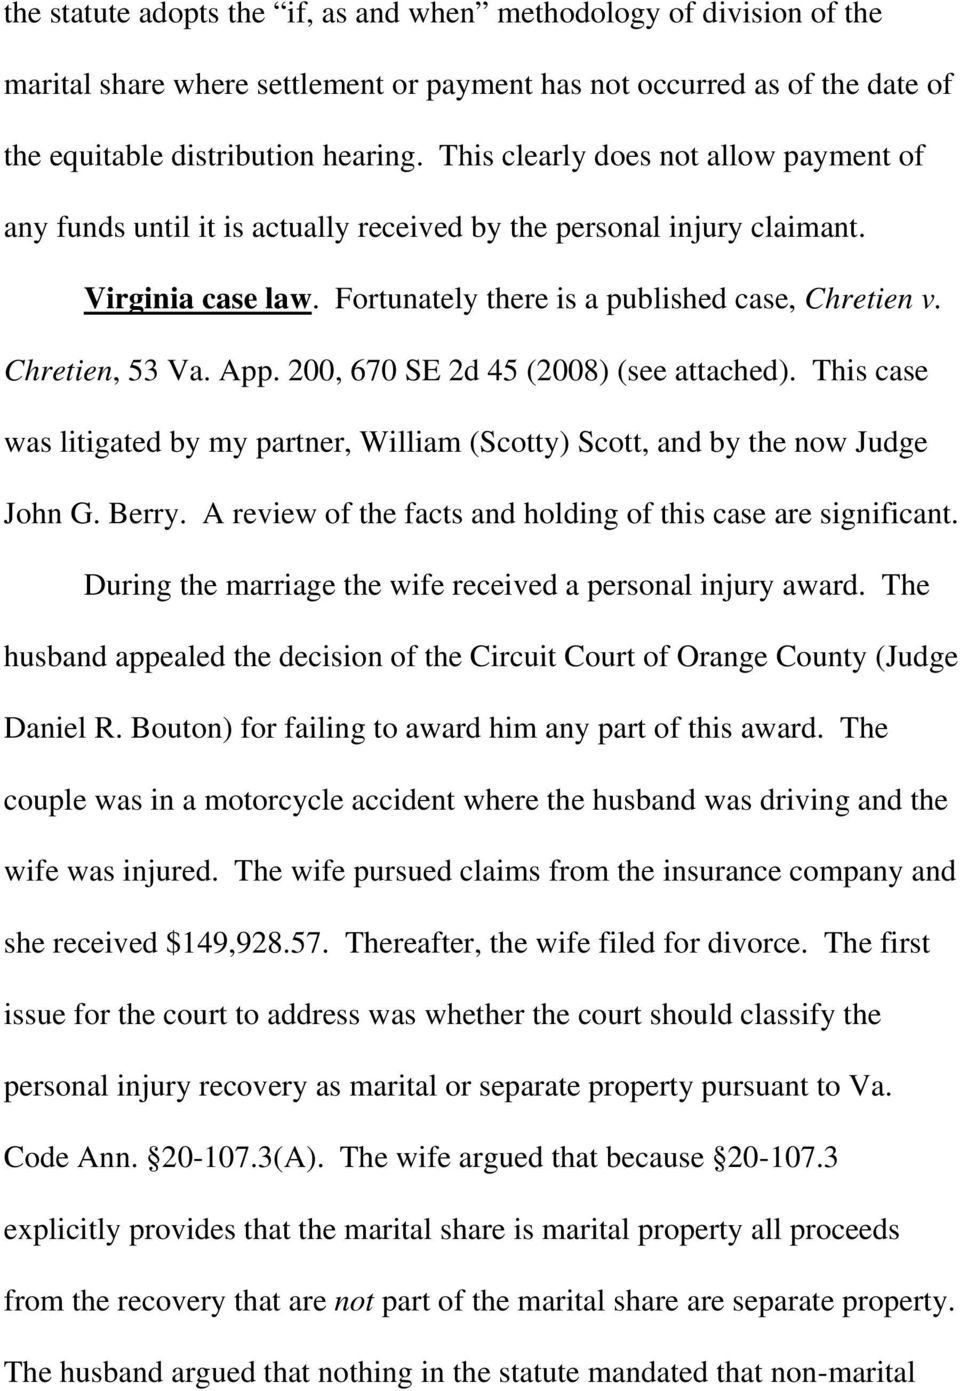 App. 200, 670 SE 2d 45 (2008) (see attached). This case was litigated by my partner, William (Scotty) Scott, and by the now Judge John G. Berry.